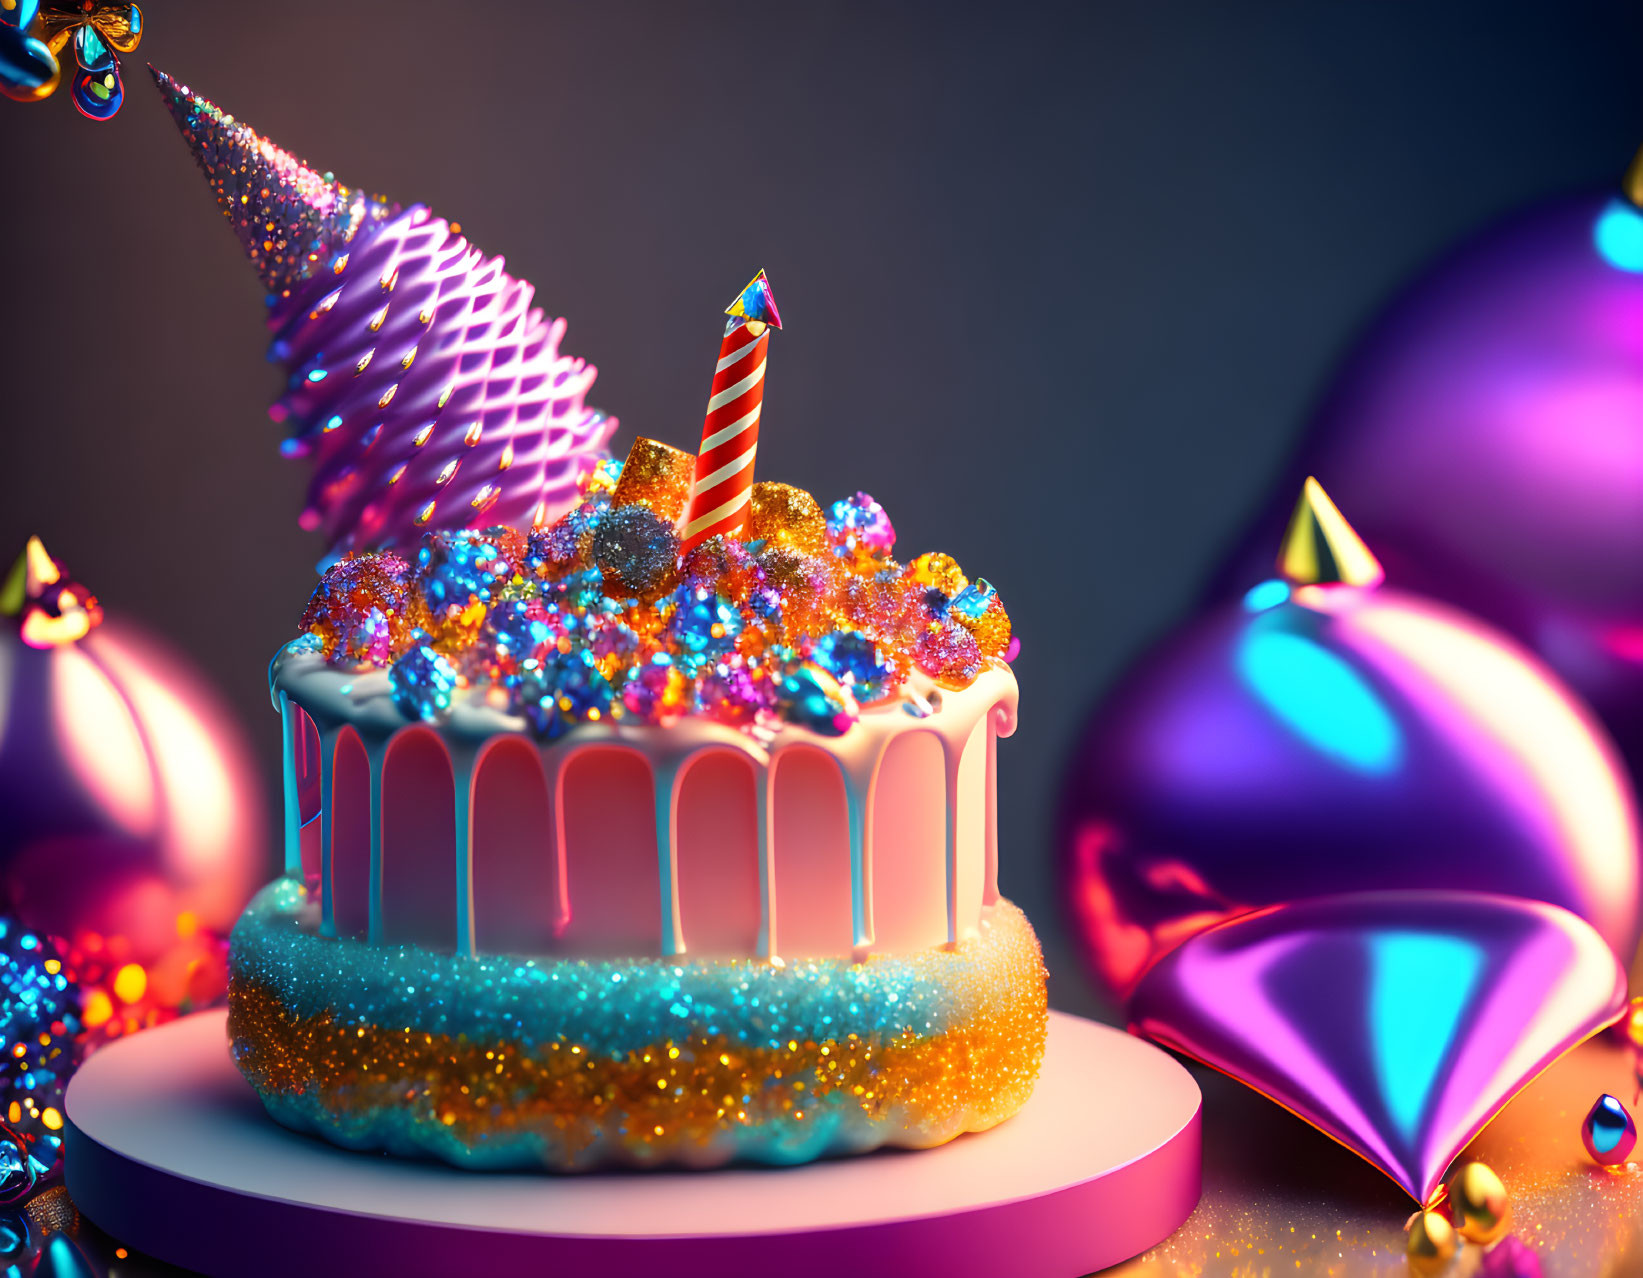 Colorful Birthday Cake with Glittery Frosting and Party Decorations